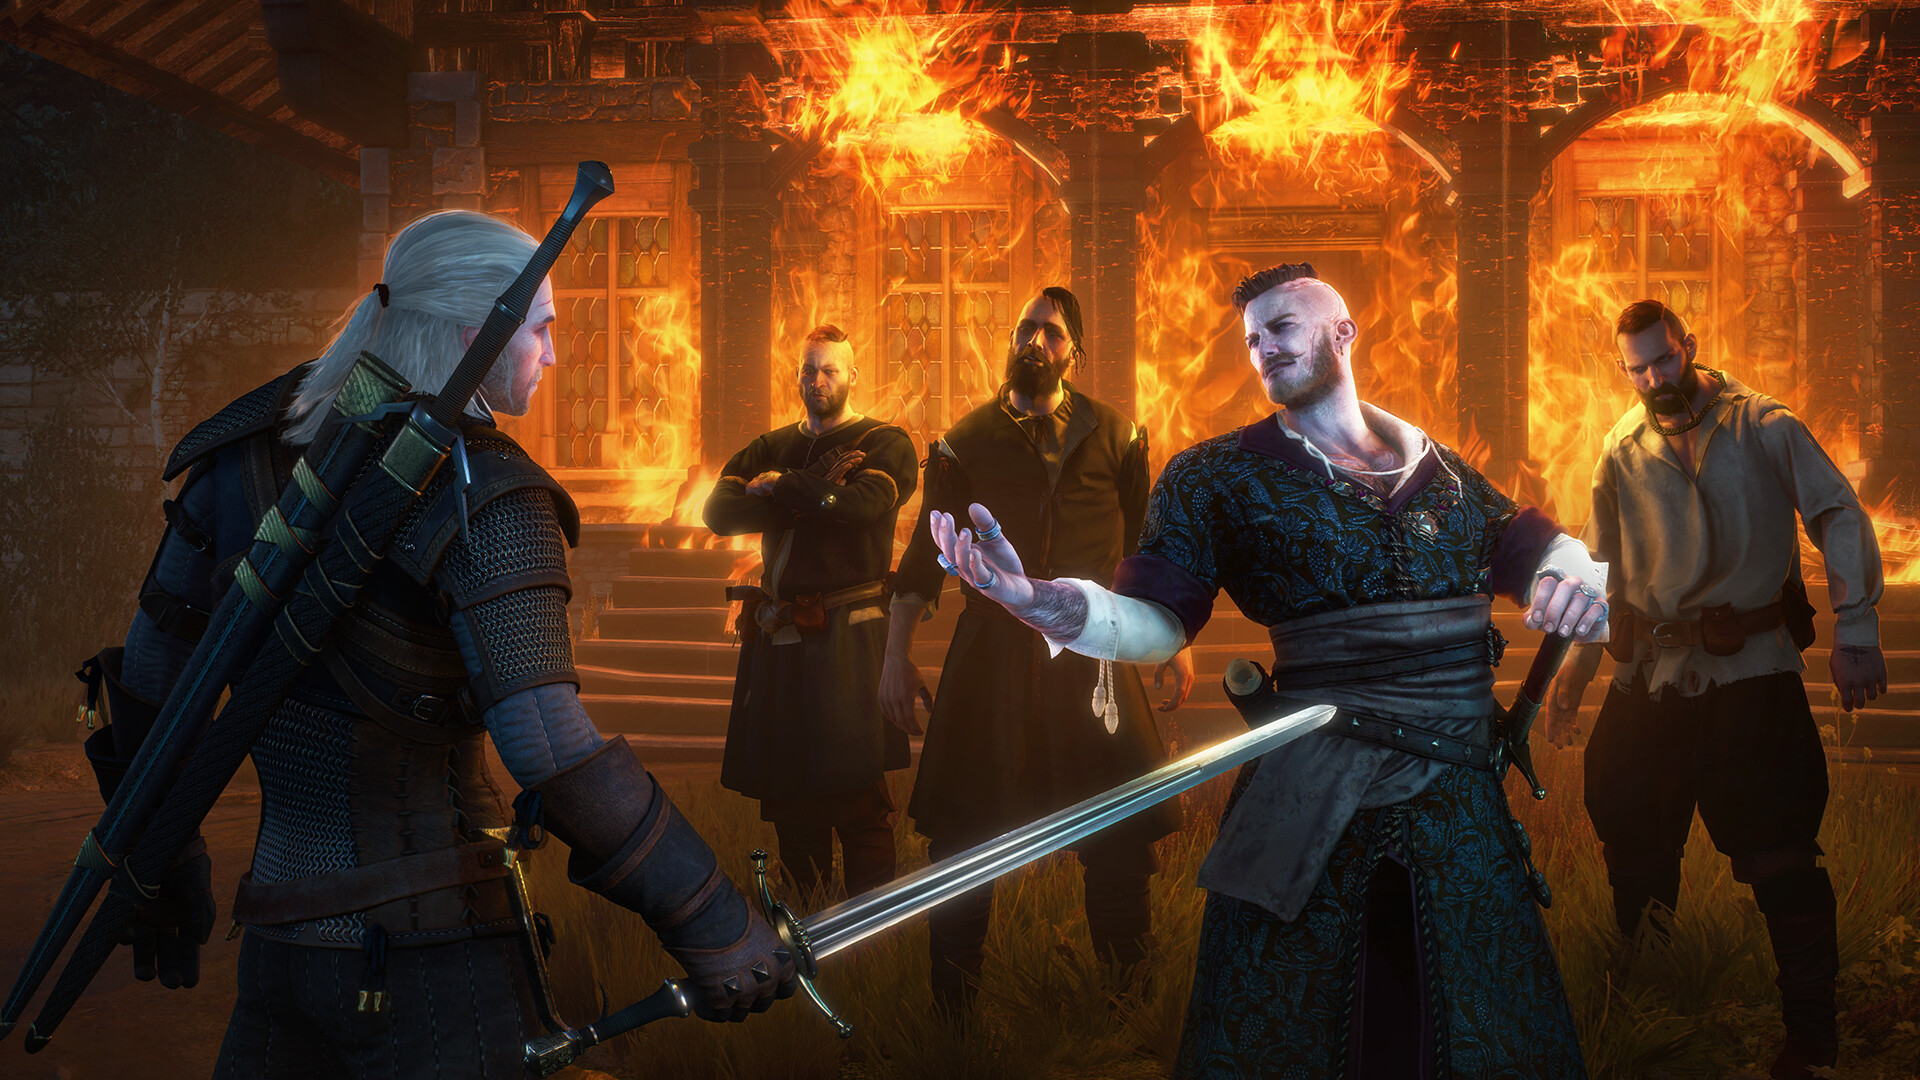 The Witcher 3: Wild Hunt - Hearts of Stone Featured Screenshot #1